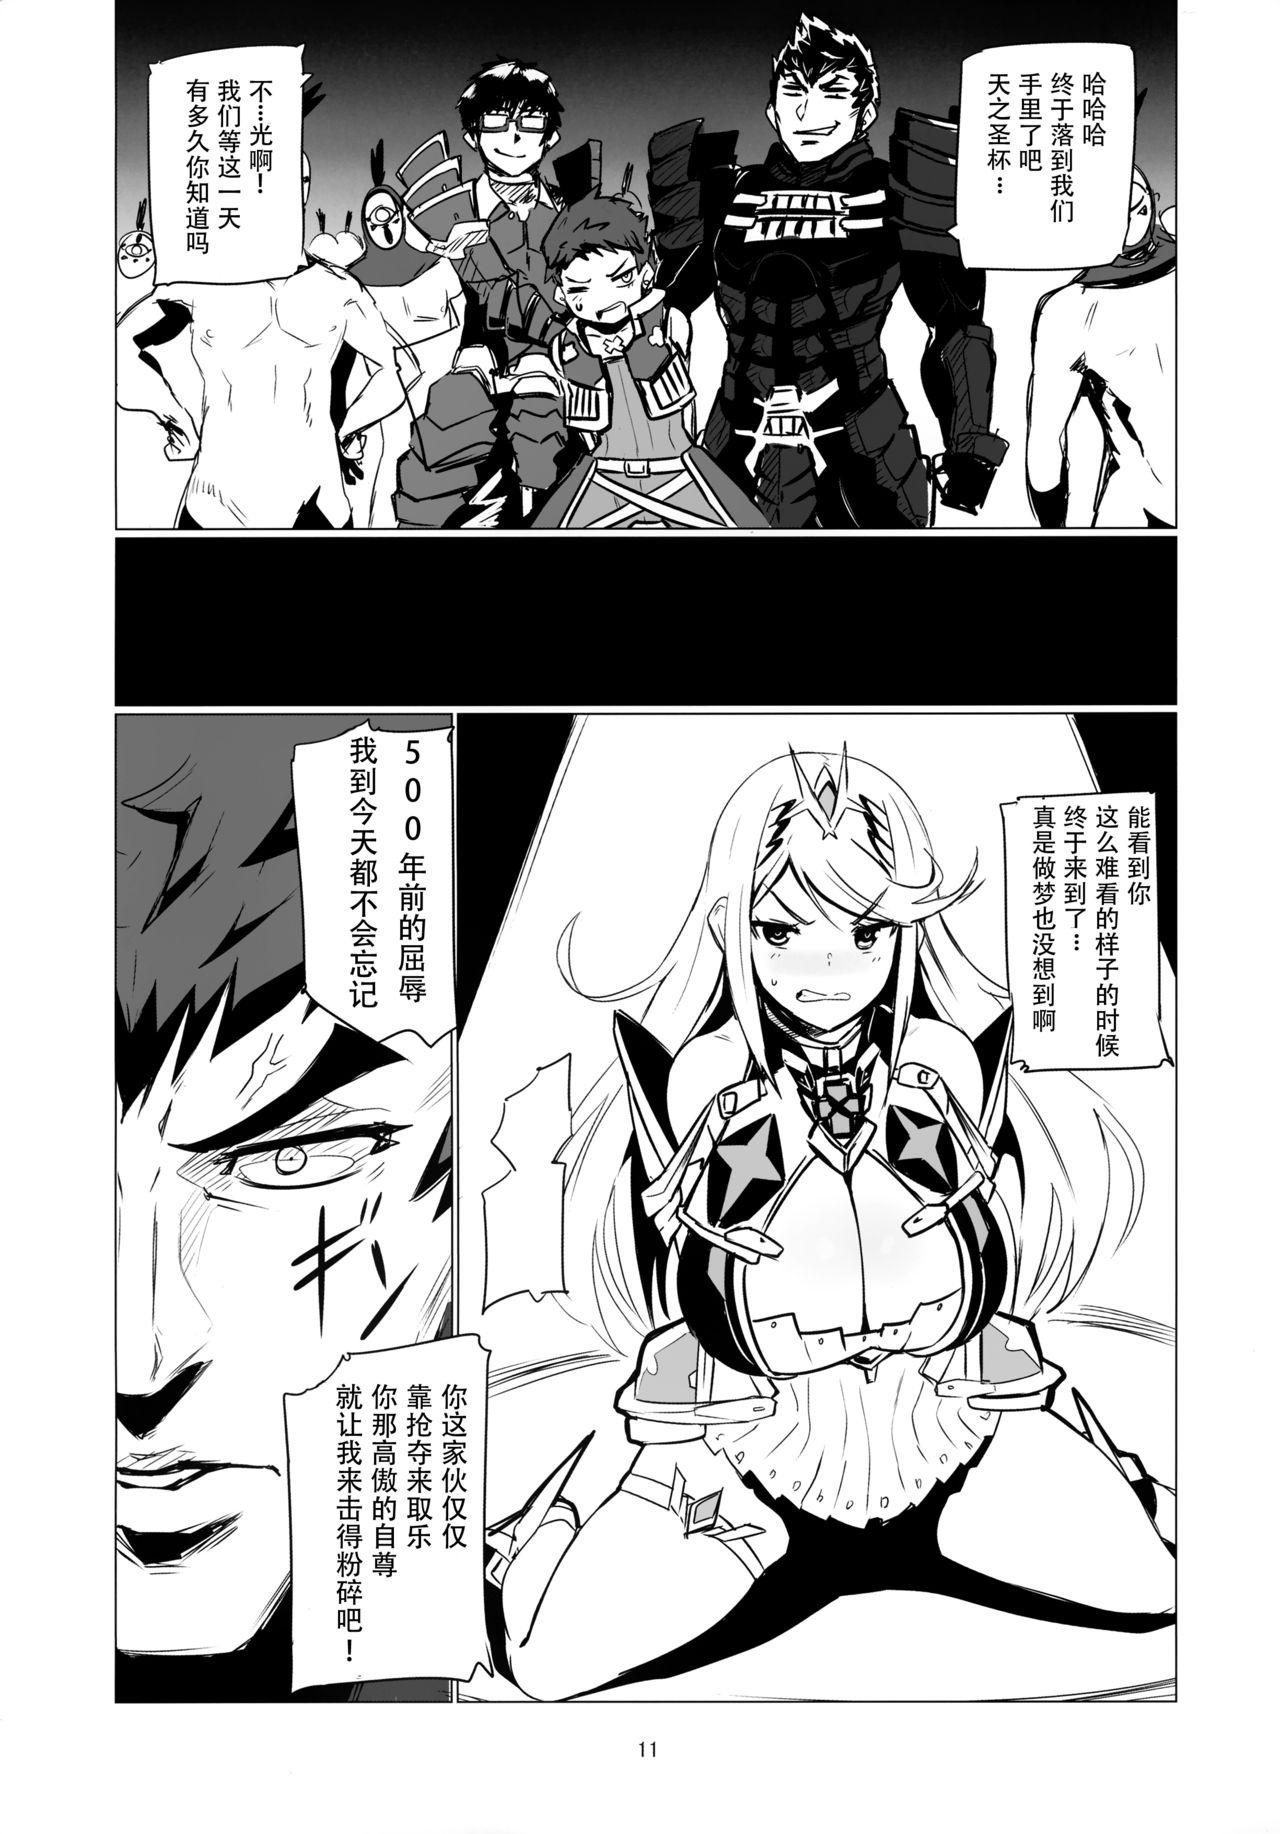 Free Teenage Porn Homurizebure - Xenoblade chronicles 2 Tied - Page 11